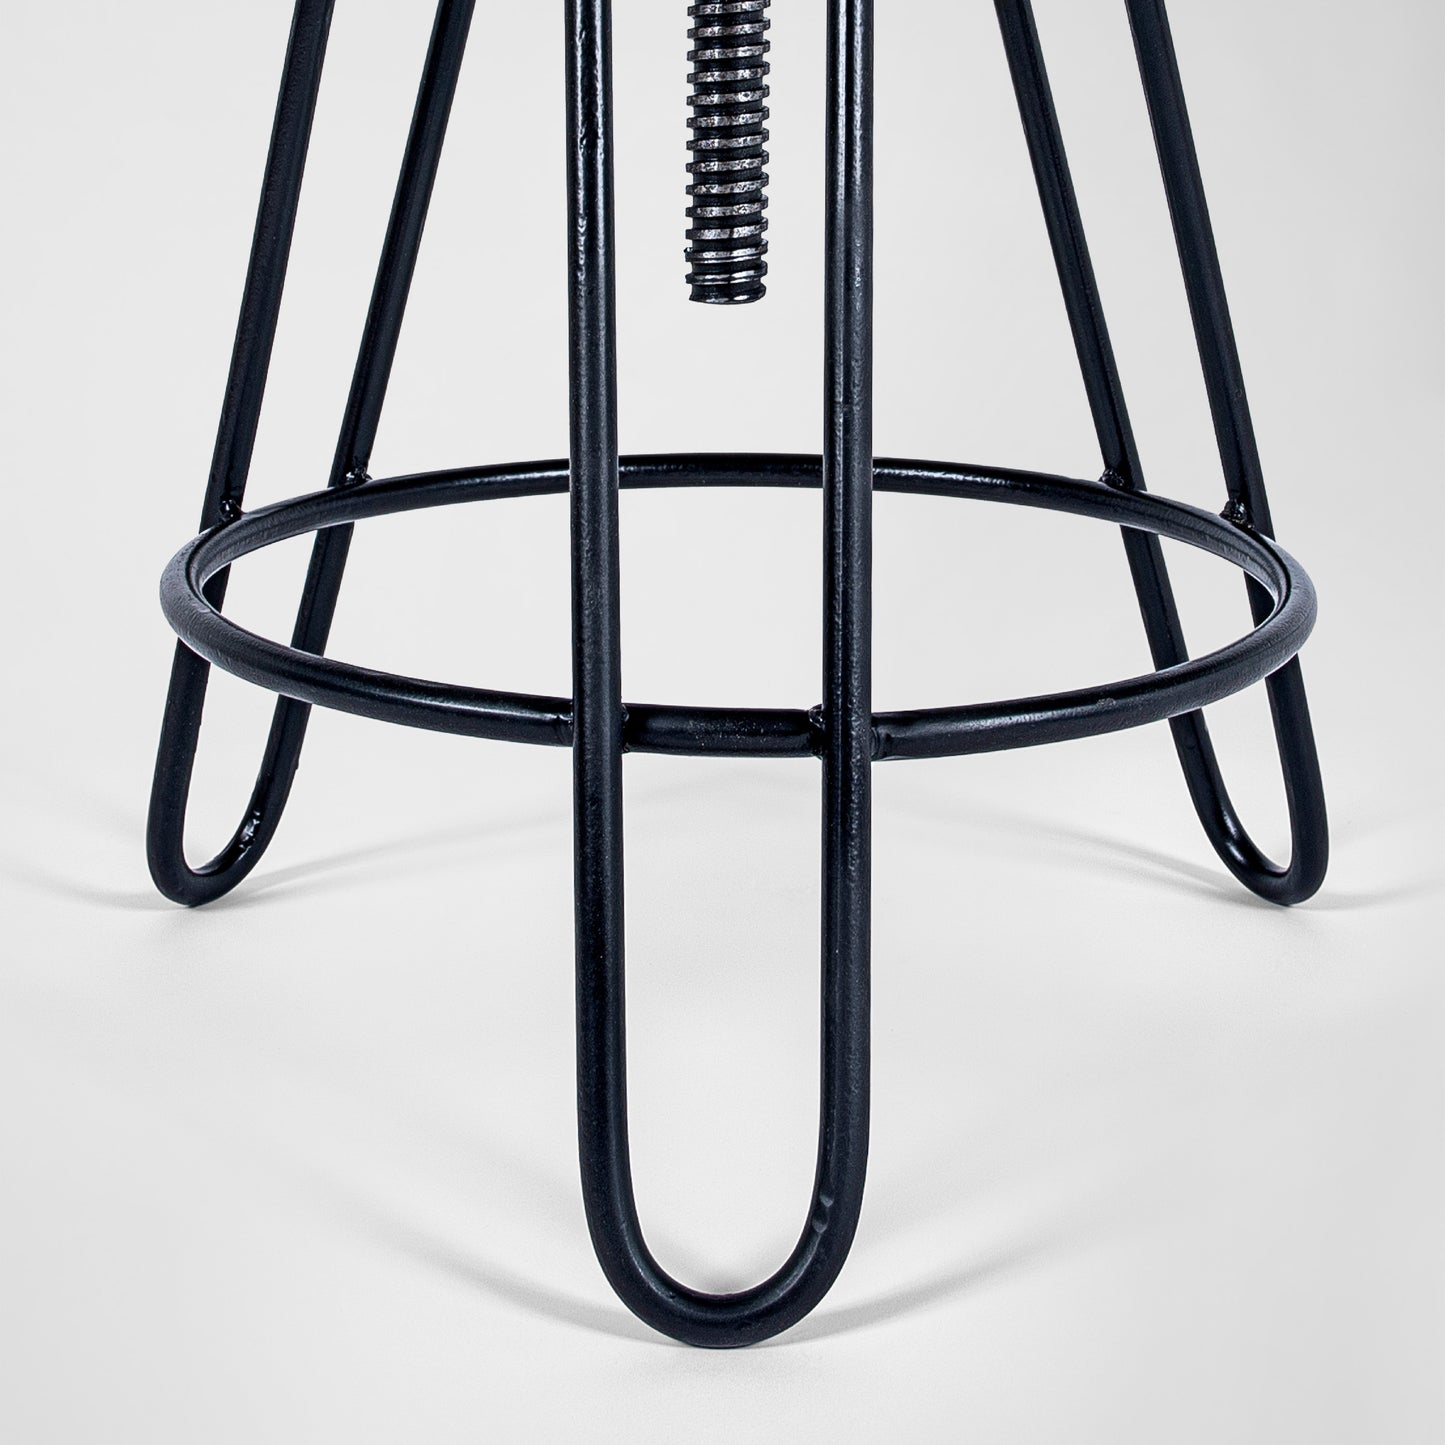 HairPin 102 – Handmade industrial design swivel stool made of metal with wooden seat in black and copper